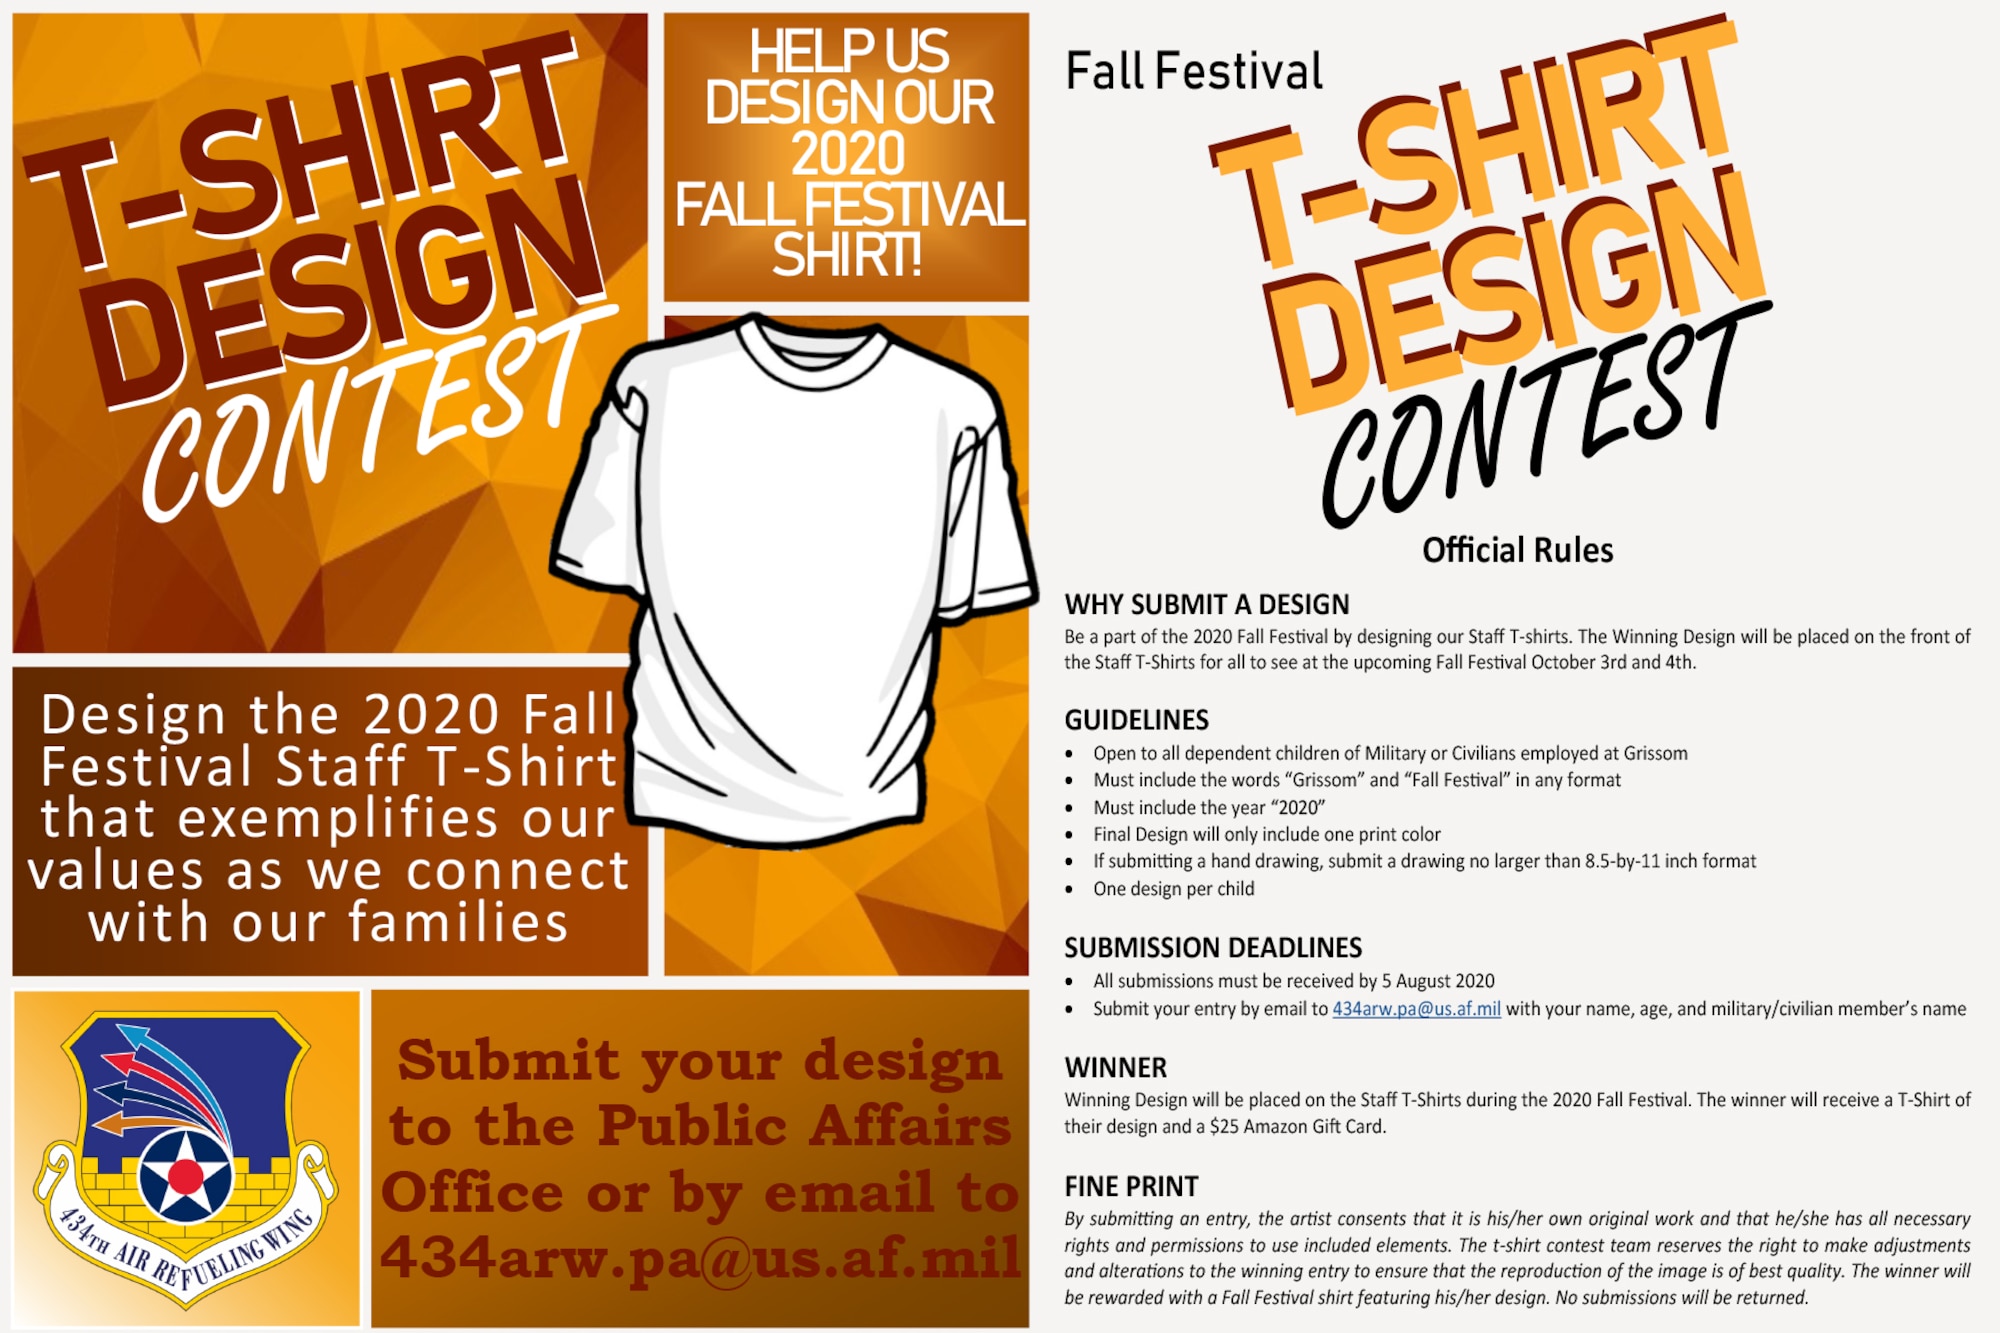 The wing is currently accepting designs for the 2020 Fall Festival staff t-shirts. The winning design will be placed on the front of the staff t-shirts for all to see at the upcoming Fall Festival October 3-4, 2020. (U.S. Air Force graphic/Master Sgt. Ben Mota)